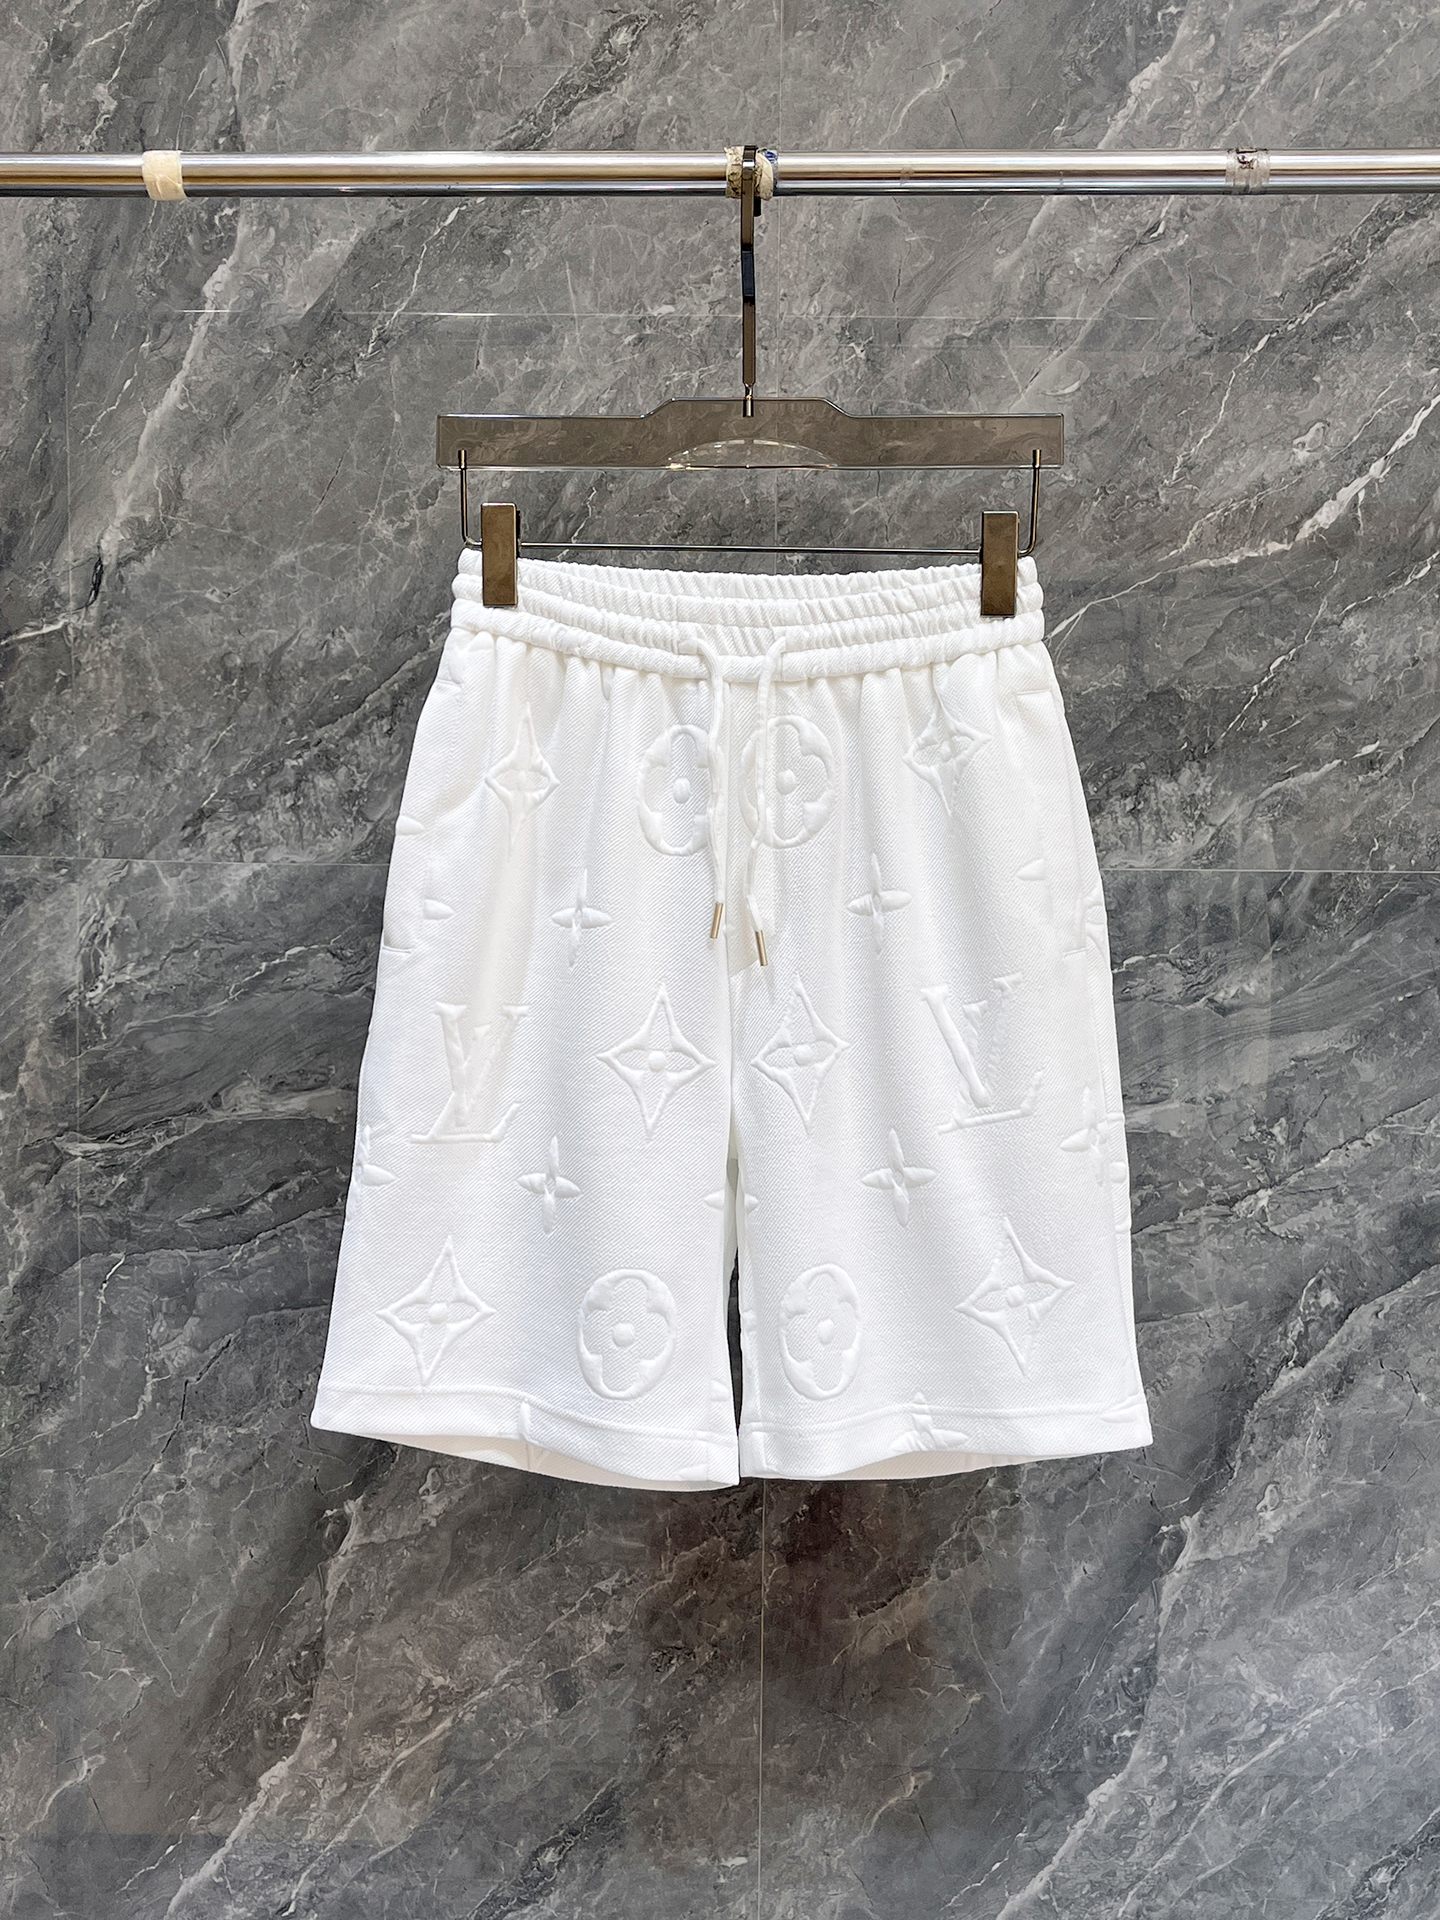 Louis Vuitton Clothing Shorts Customize Best Quality Replica
 Men Summer Collection Casual